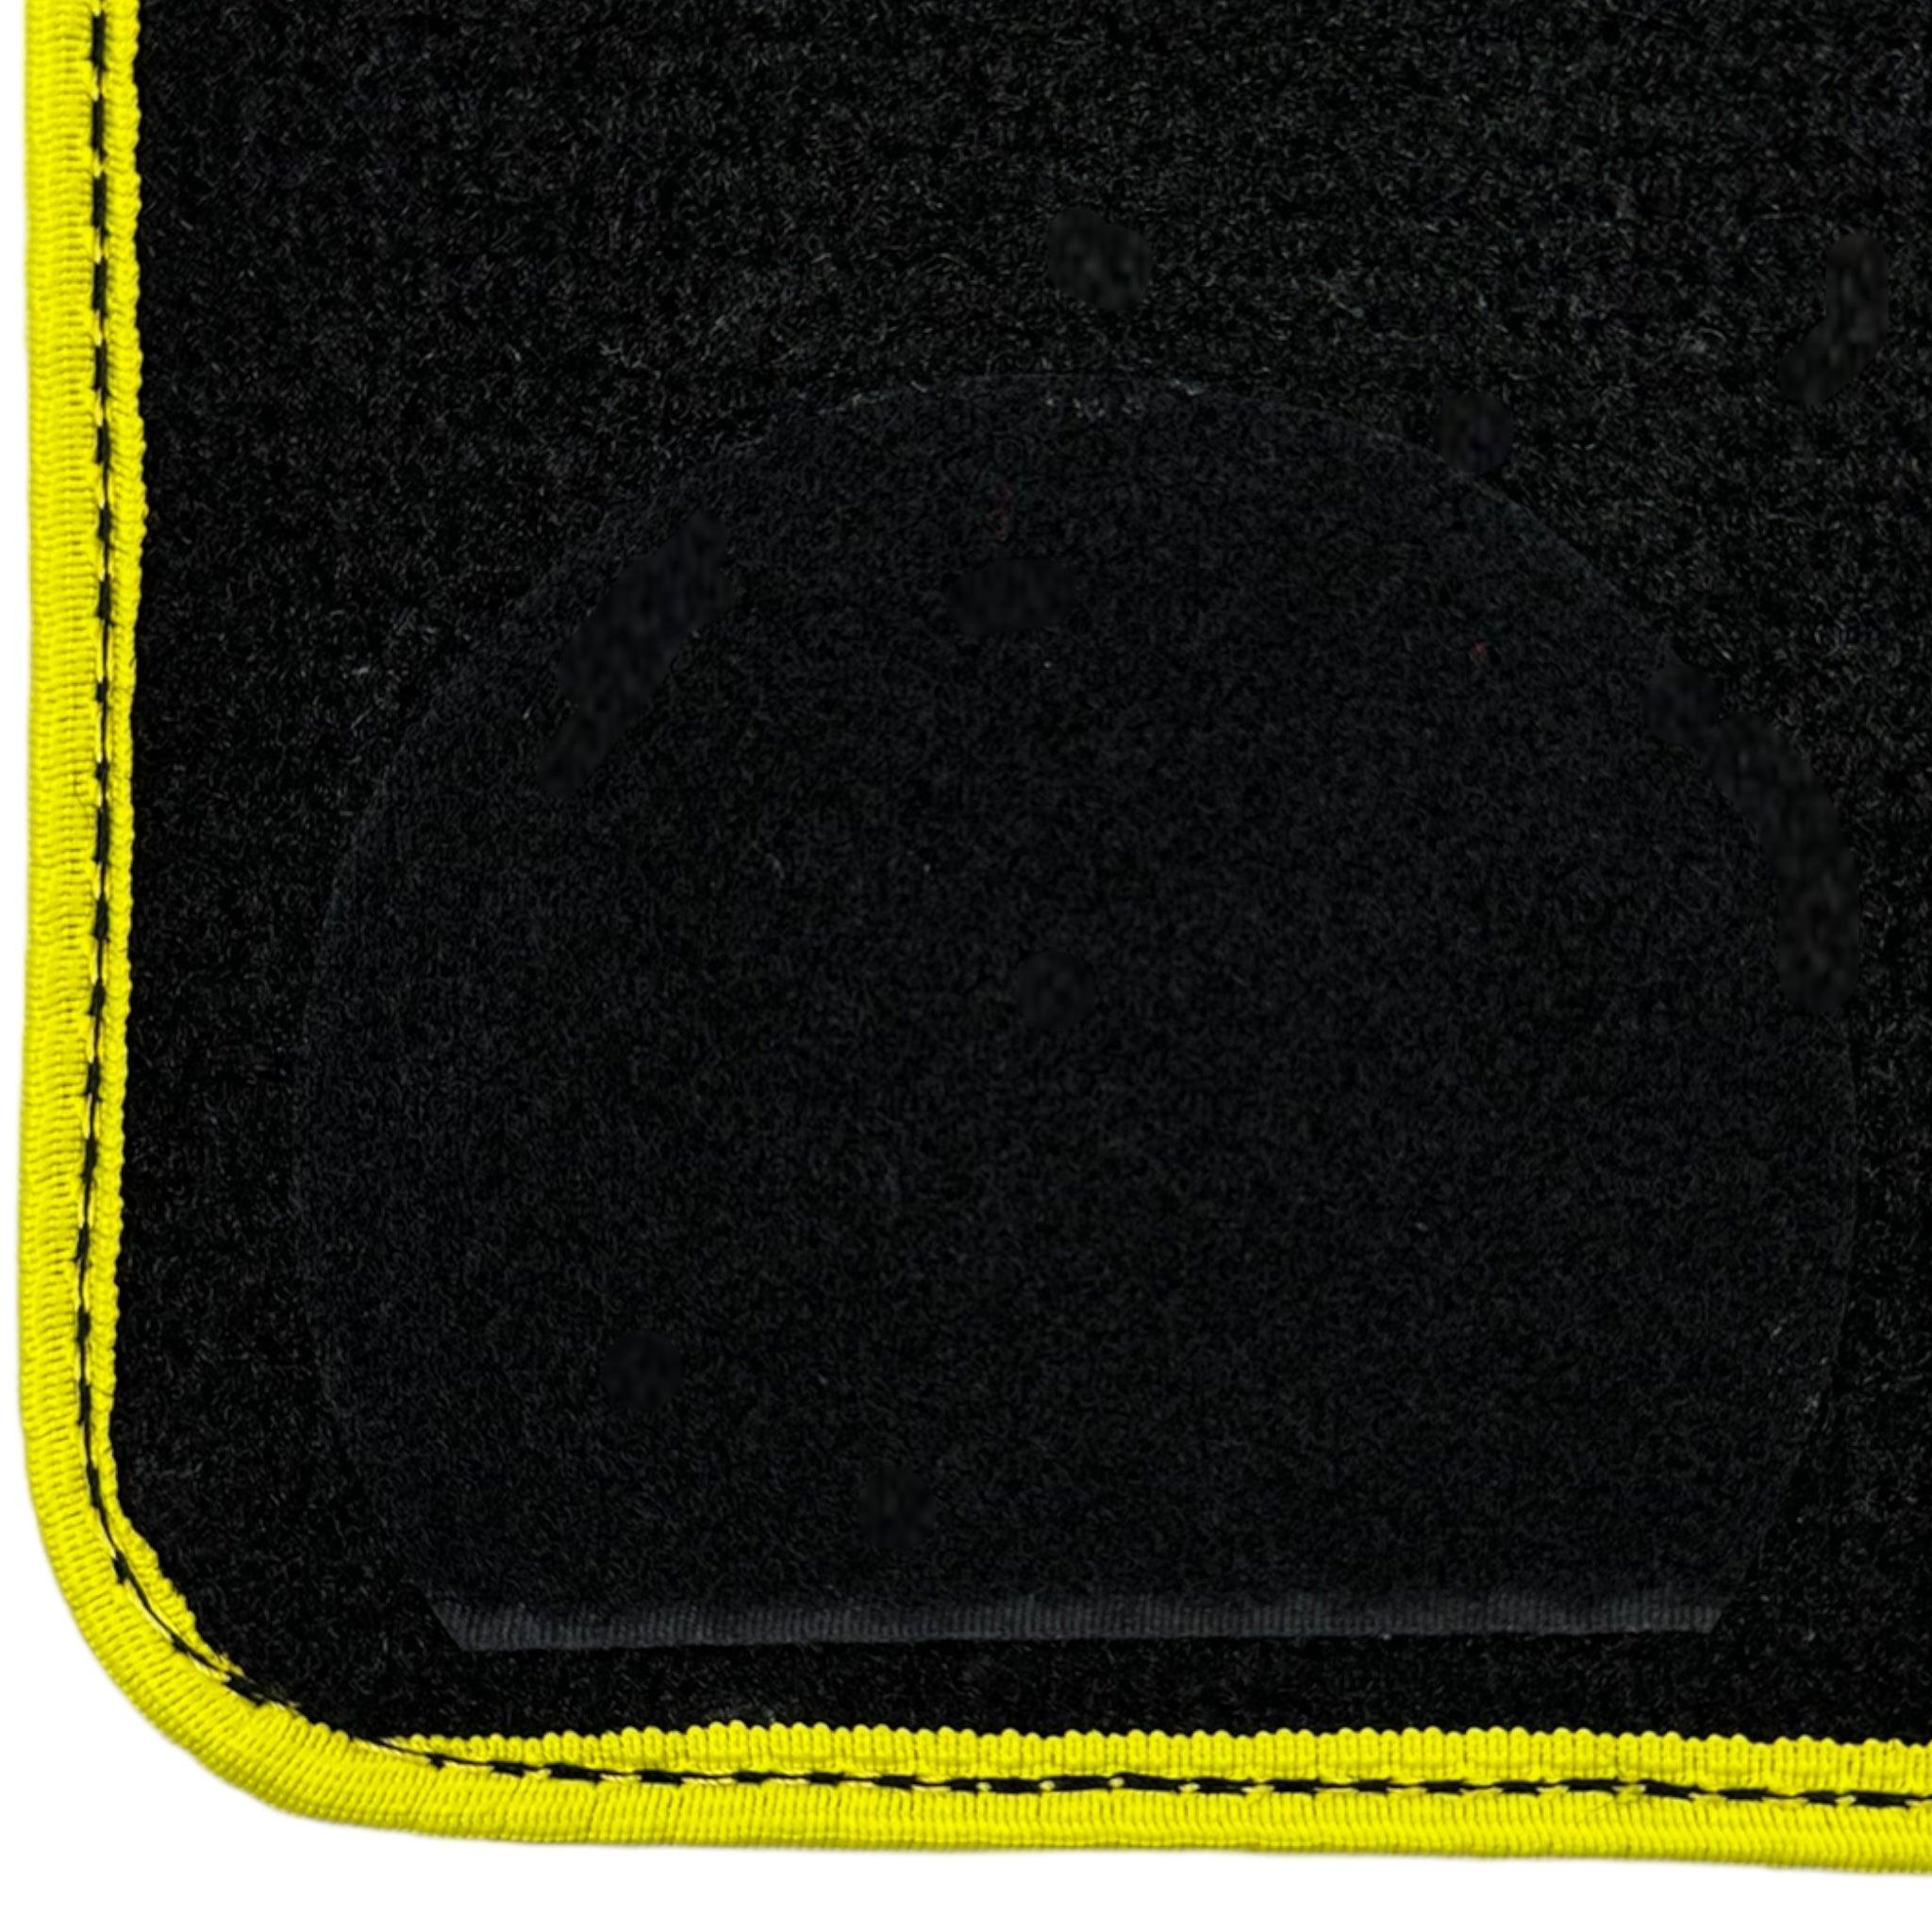 Black Floor Mats For BMW X6M Series F86 | Fighter Jet Edition | Yellow Trim